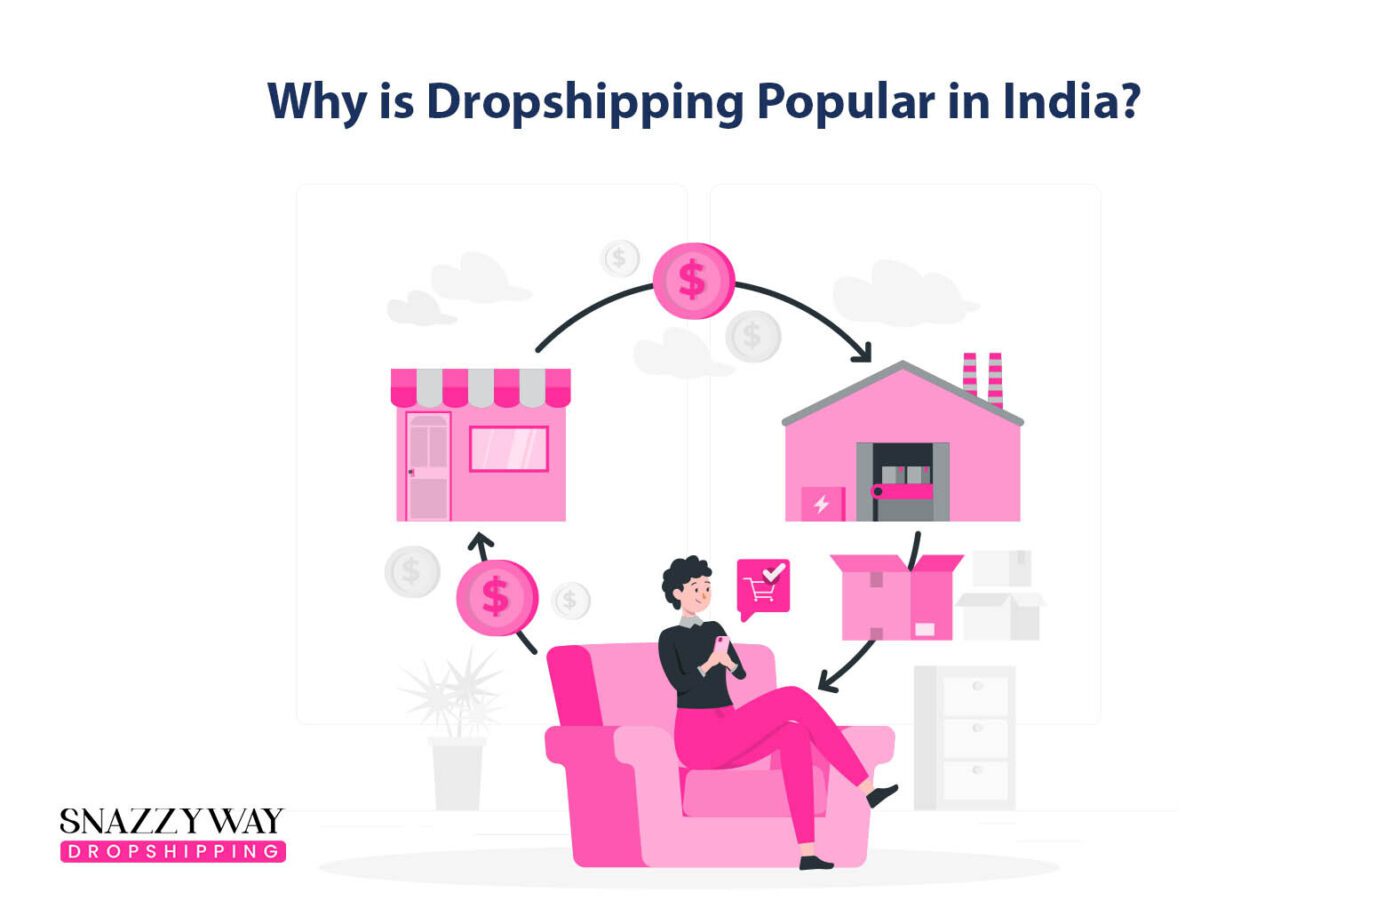 Why is Dropshipping Popular in India?